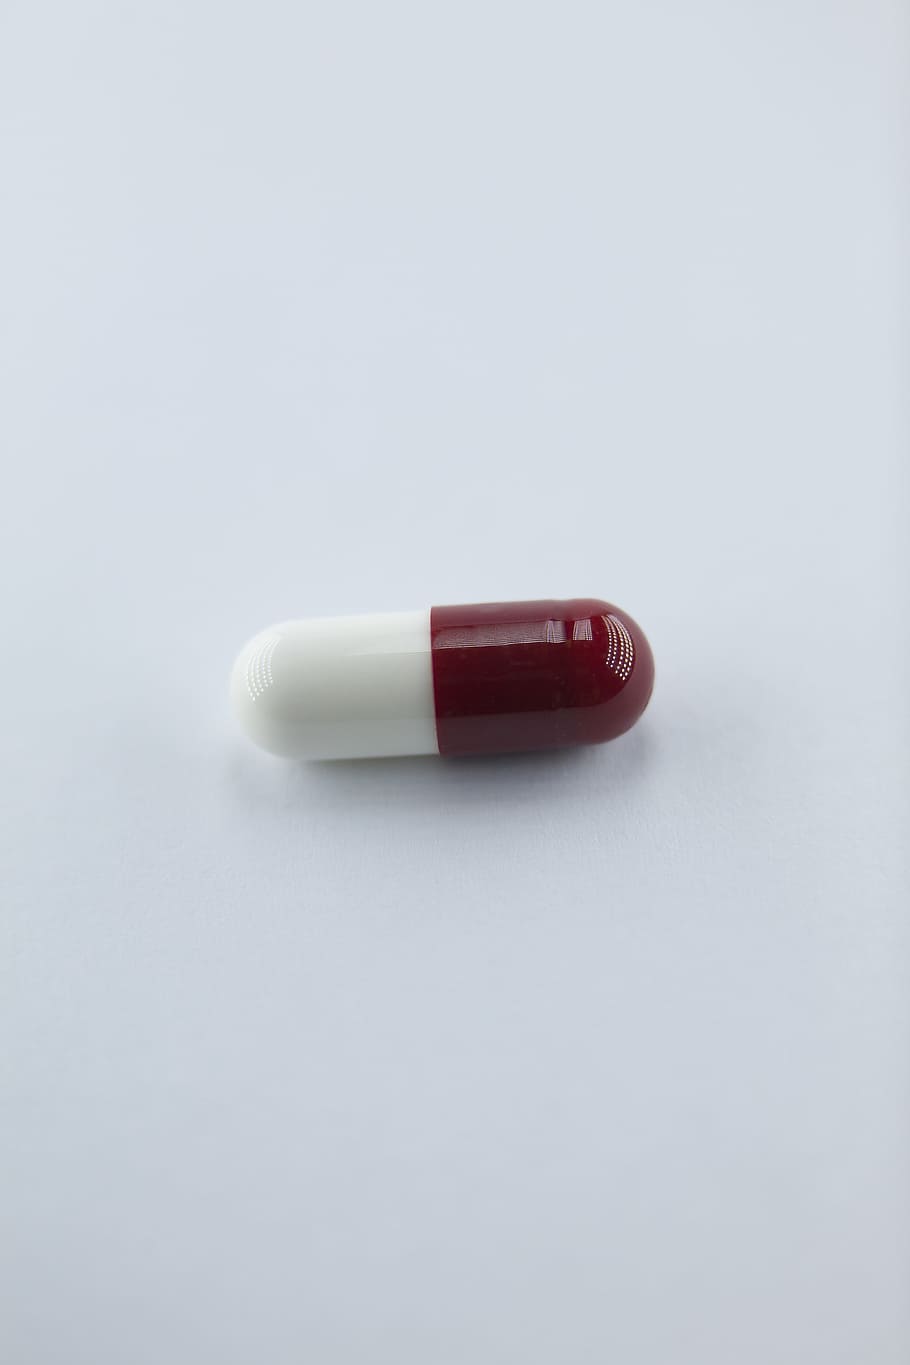 drug, health, pharmaceutical, medical, treatment, studio shot, single object, pill, red, healthcare and medicine